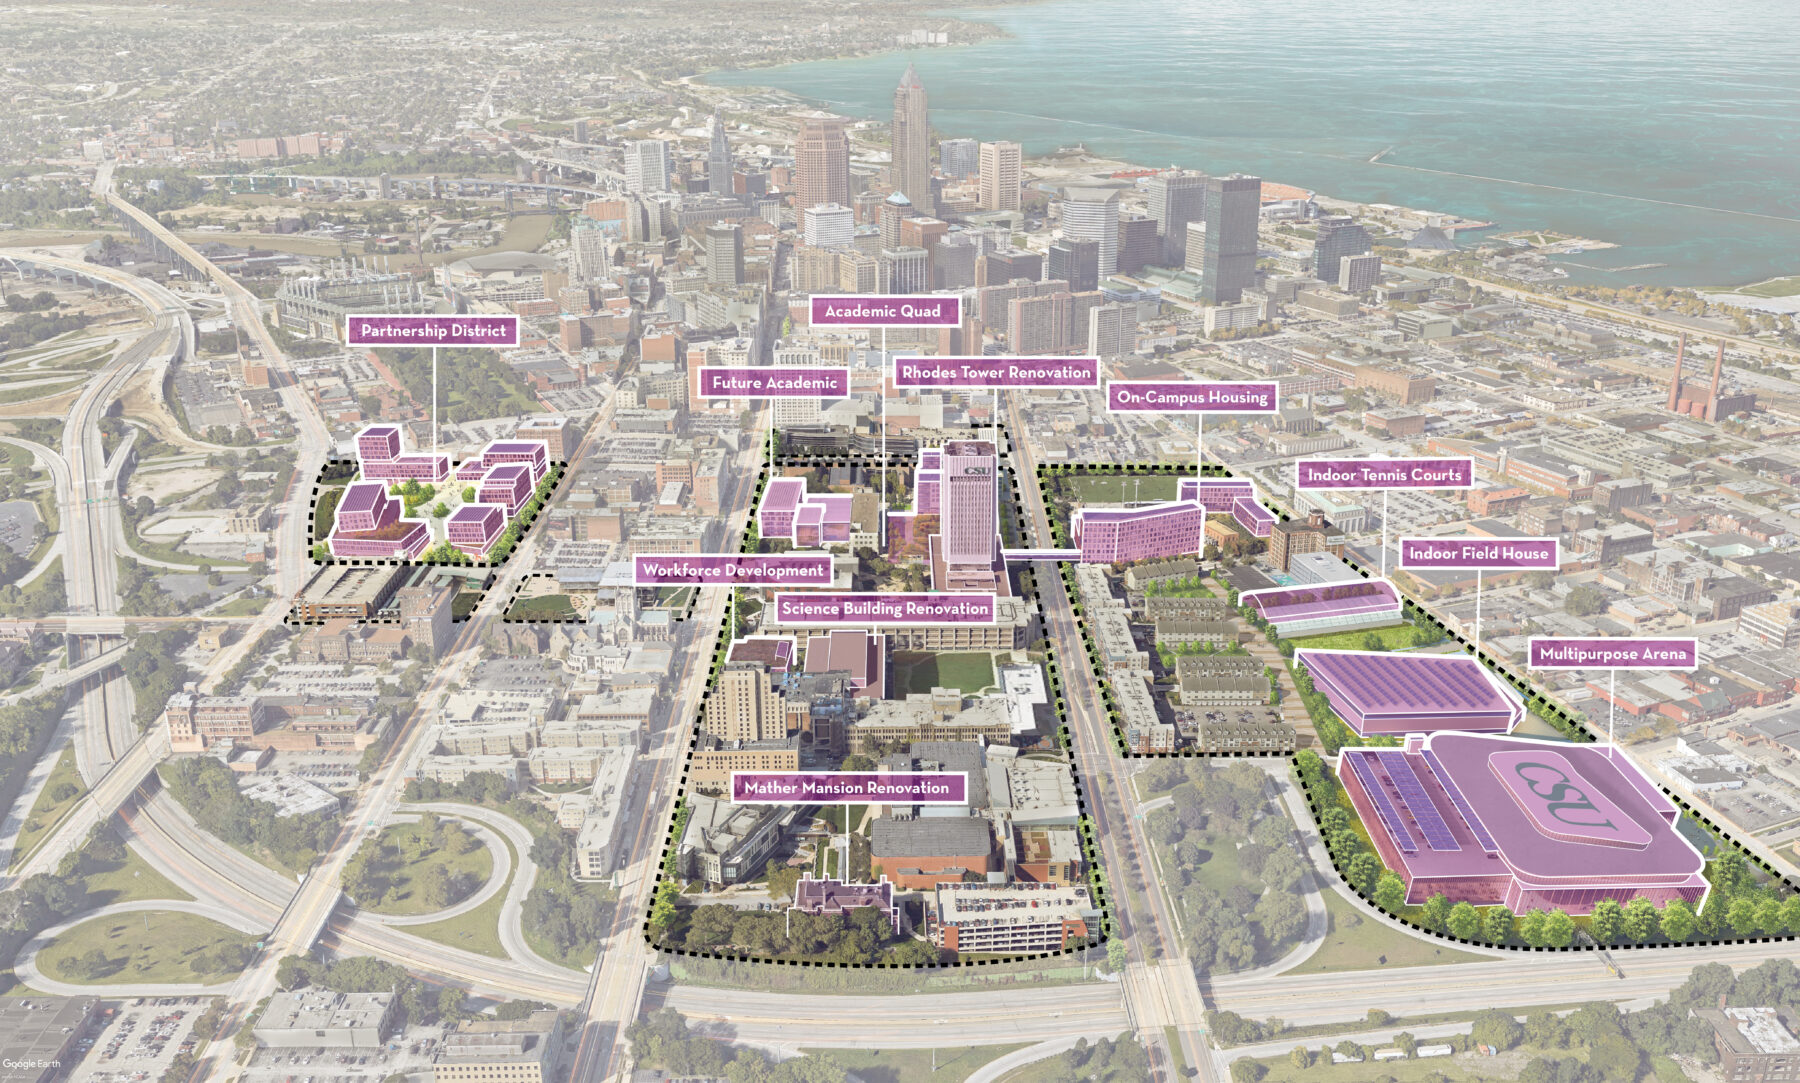 Future campus vision diagram looking west, showing the physical context in Downtown Cleveland